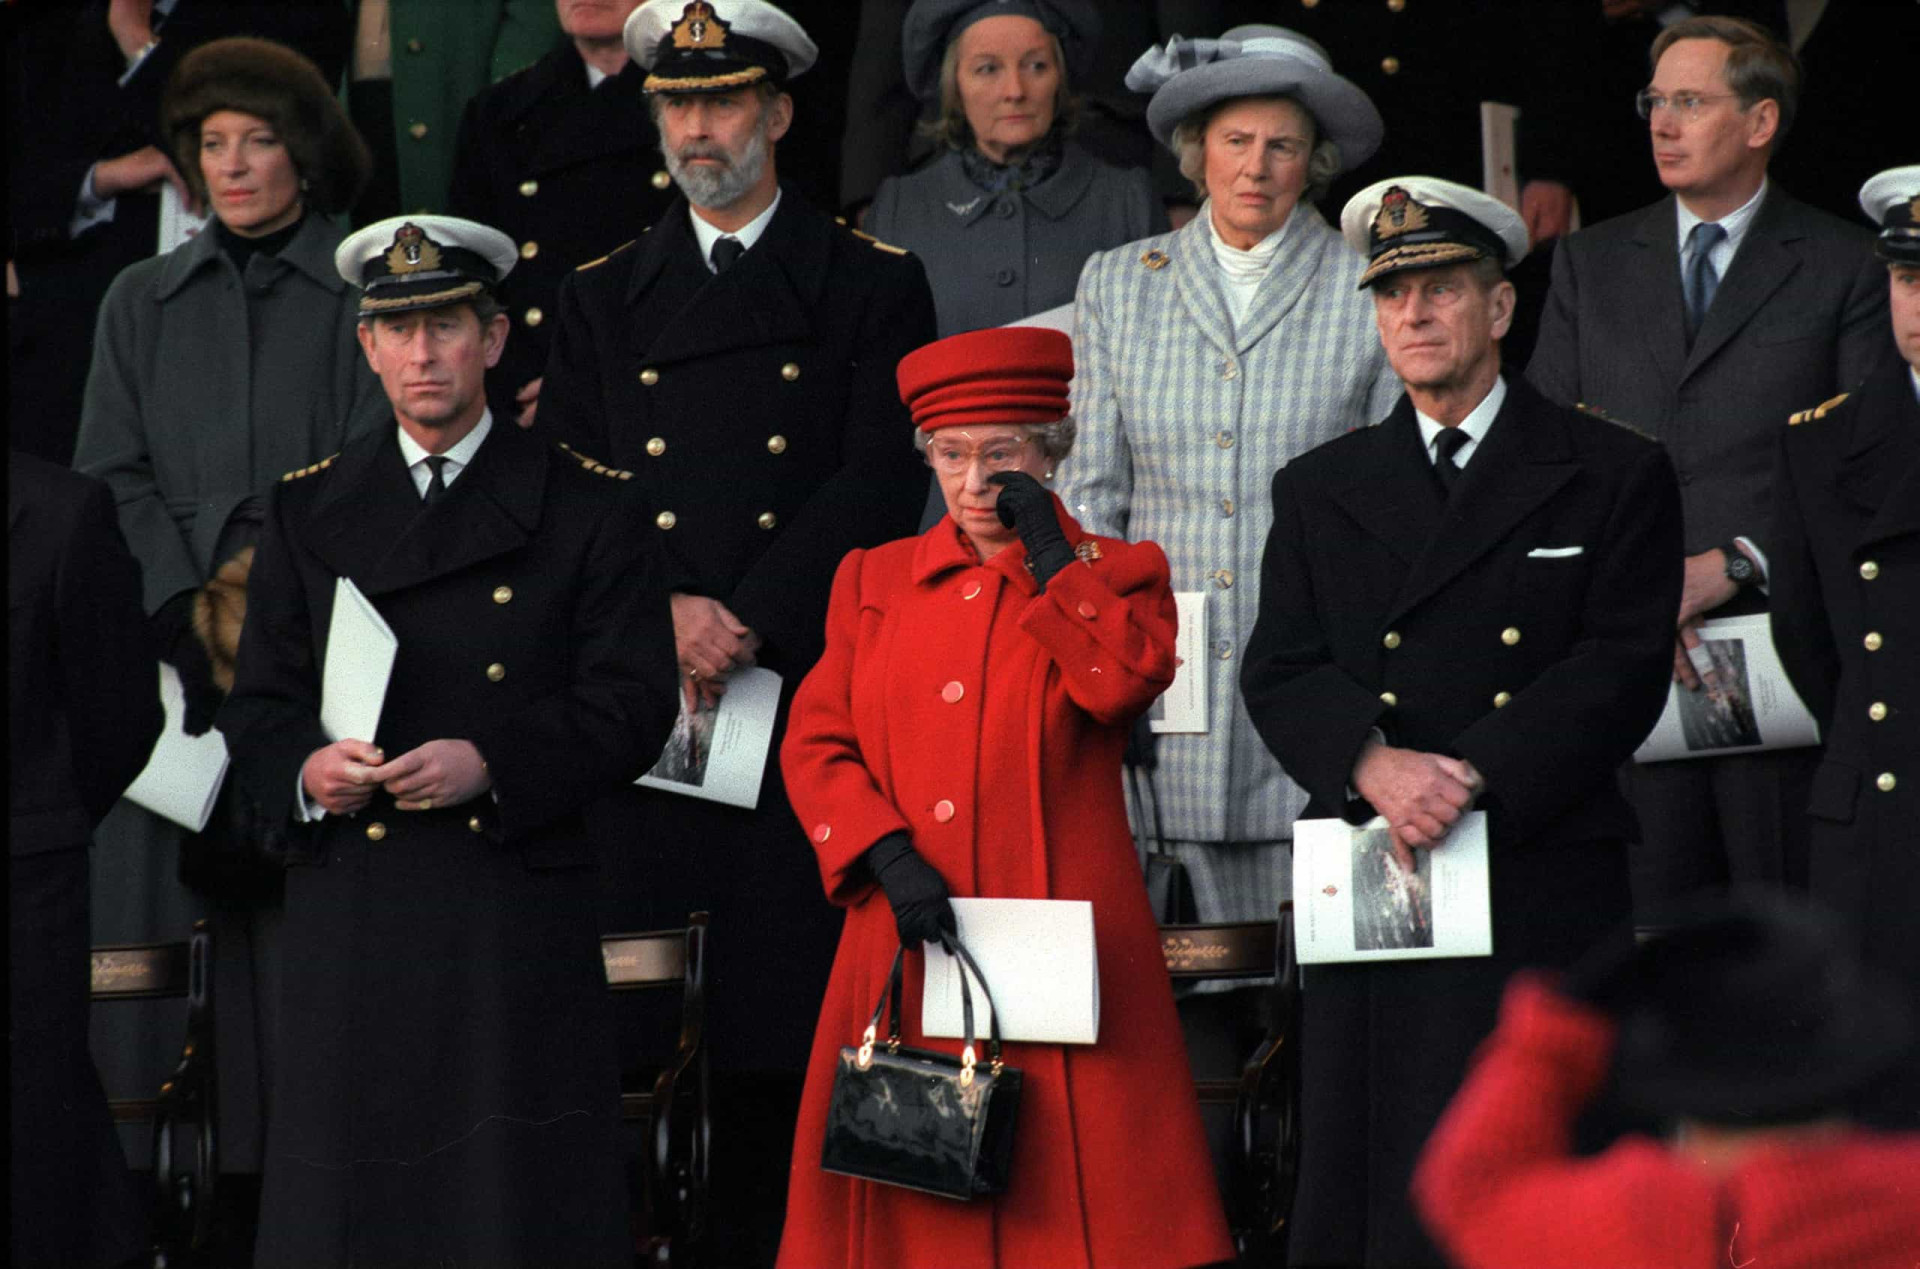 <p>On December 11, 1997, after 44 years in royal service, Britannia was retired from the seas. The late Queen, normally undemonstrative, was seen wiping away a tear during the decommissioning service, which was also attended by Prince Philip and Prince Charles.</p><p><a href="https://www.msn.com/en-us/community/channel/vid-7xx8mnucu55yw63we9va2gwr7uihbxwc68fxqp25x6tg4ftibpra?cvid=94631541bc0f4f89bfd59158d696ad7e">Follow us and access great exclusive content every day</a></p>